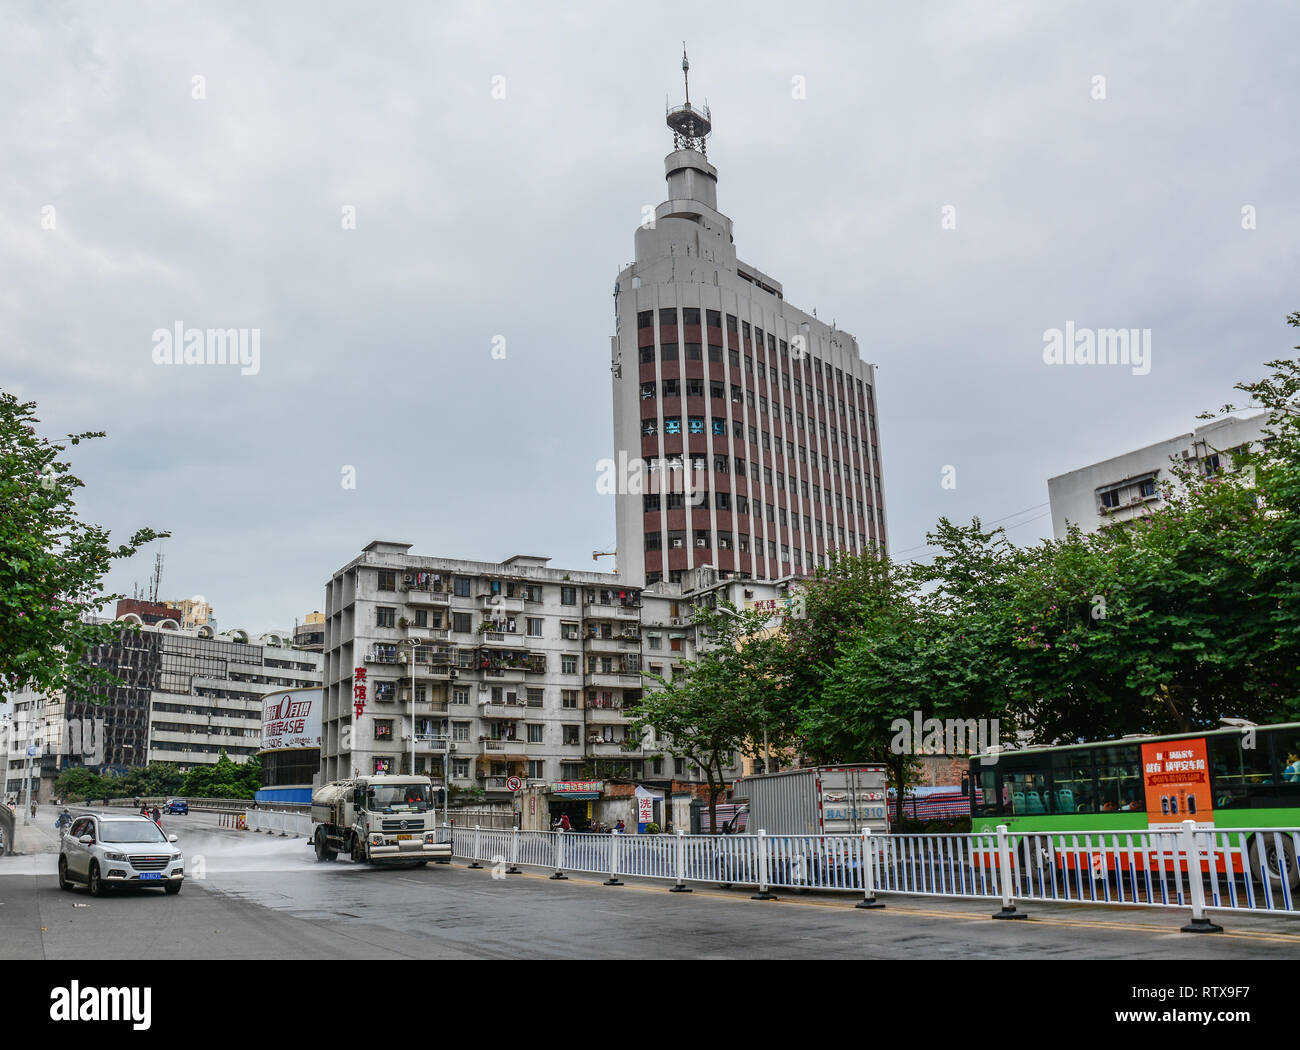 Nanning, China - Nov 1, 2015. Cityscape of Nanning, China. Nanning is a large, modern city and a transport gateway for travellers to and from Vietnam. Stock Photo